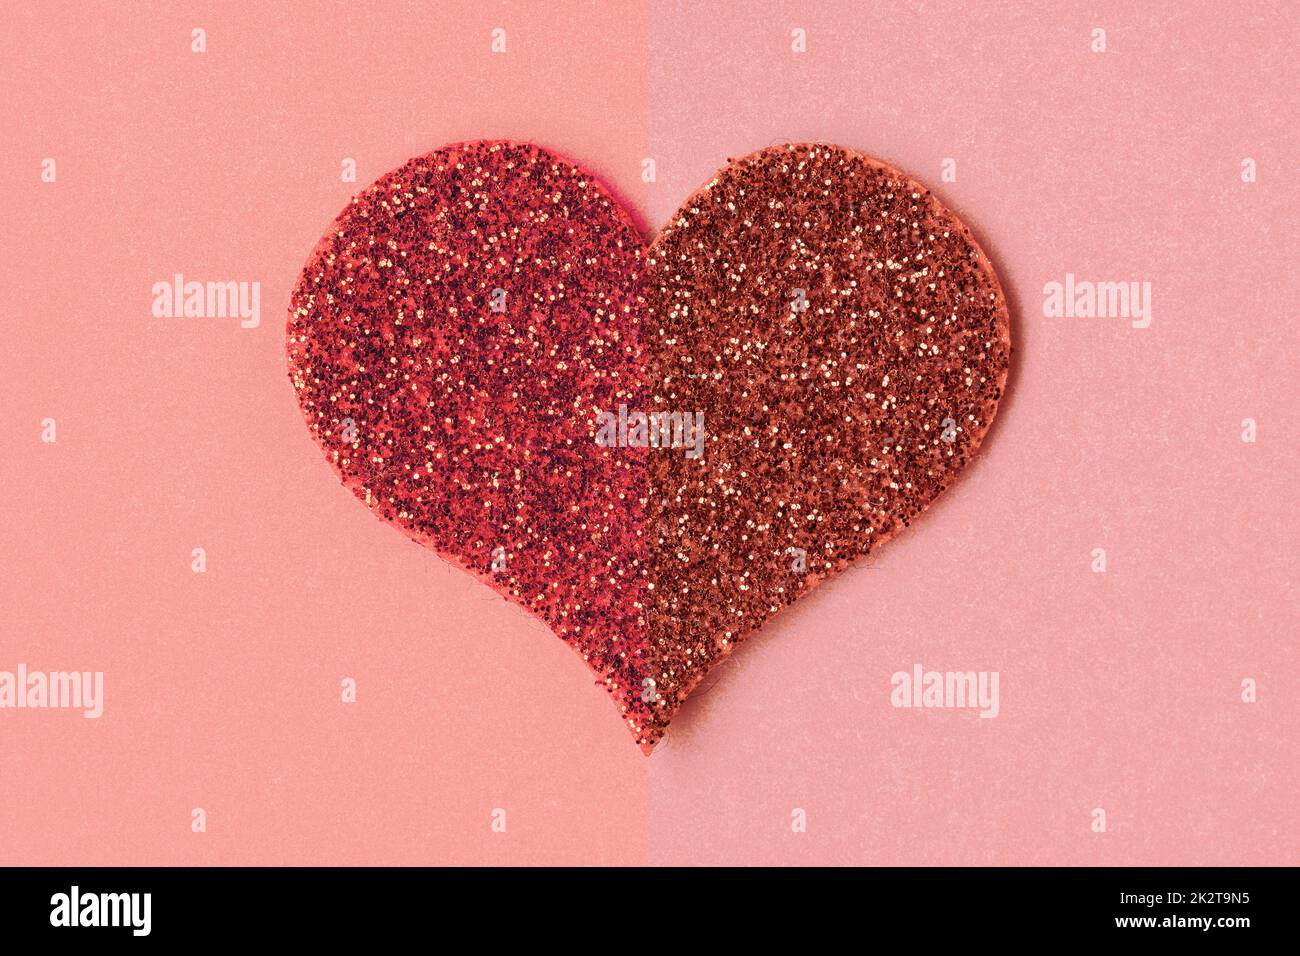 One glittering red heart on a paper background Stock Photo